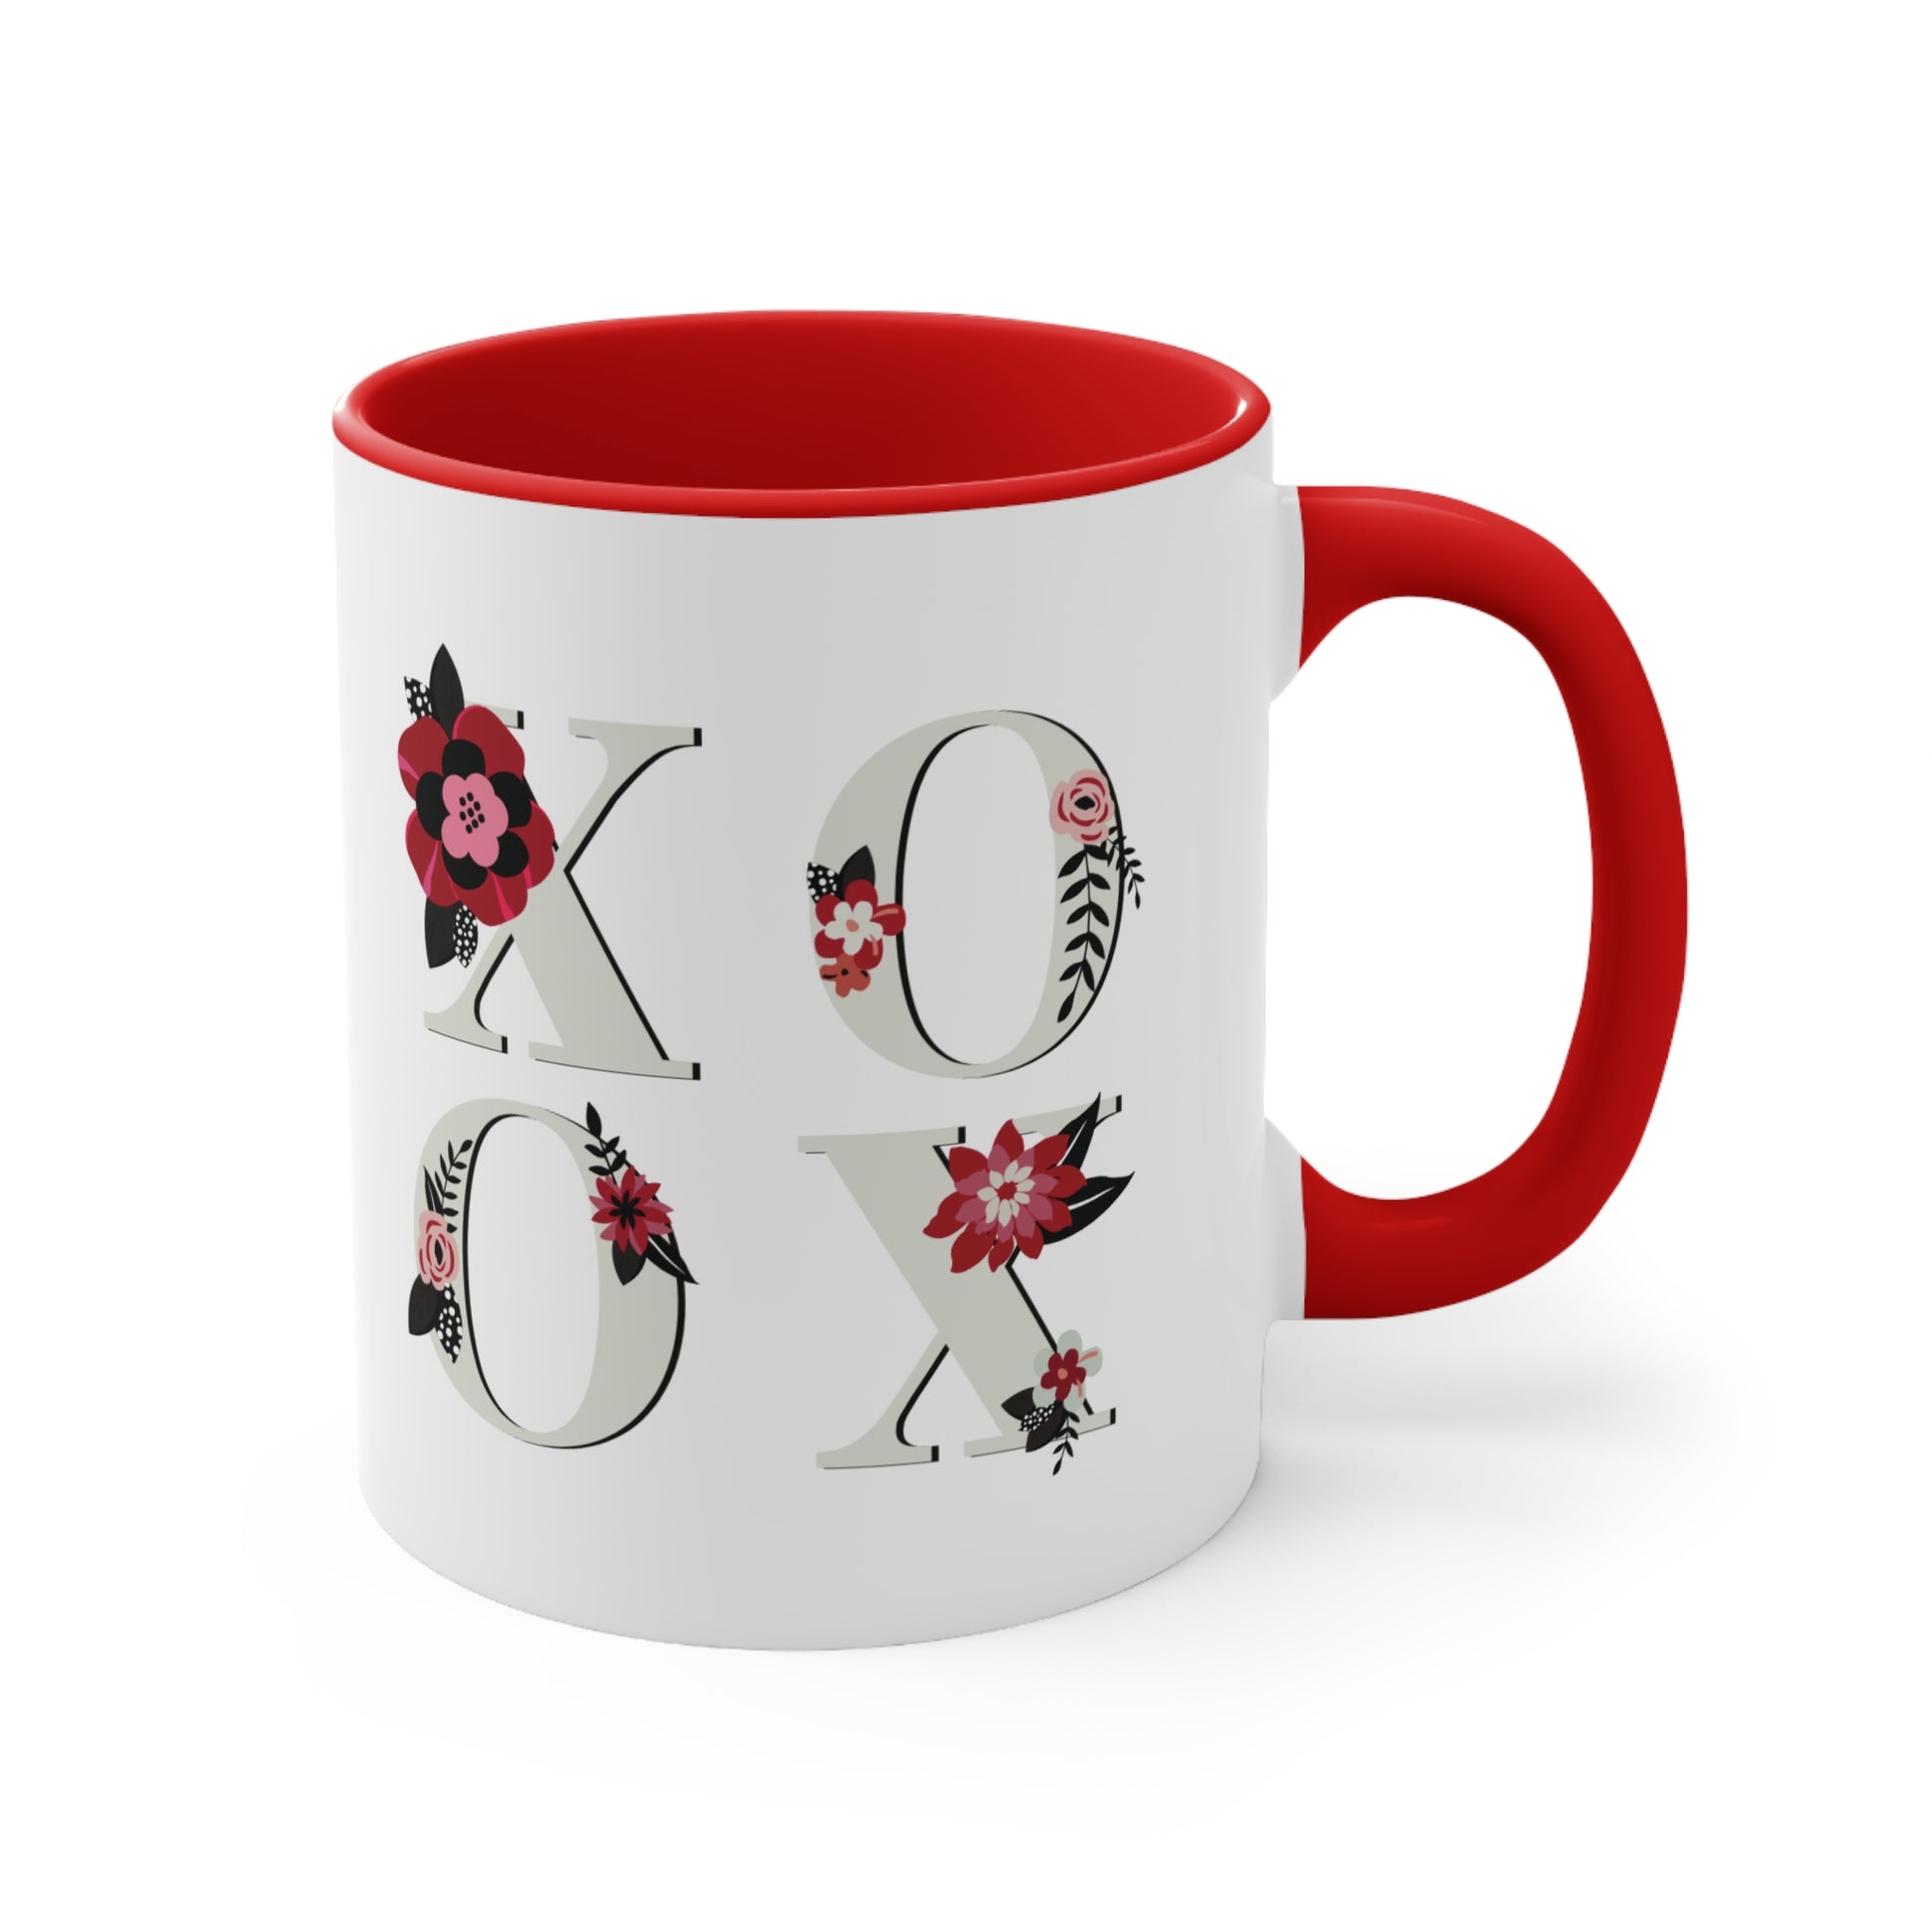 MOM XOXO 11oz ceramic accent coffee mug perfect for Mother's Day gift0